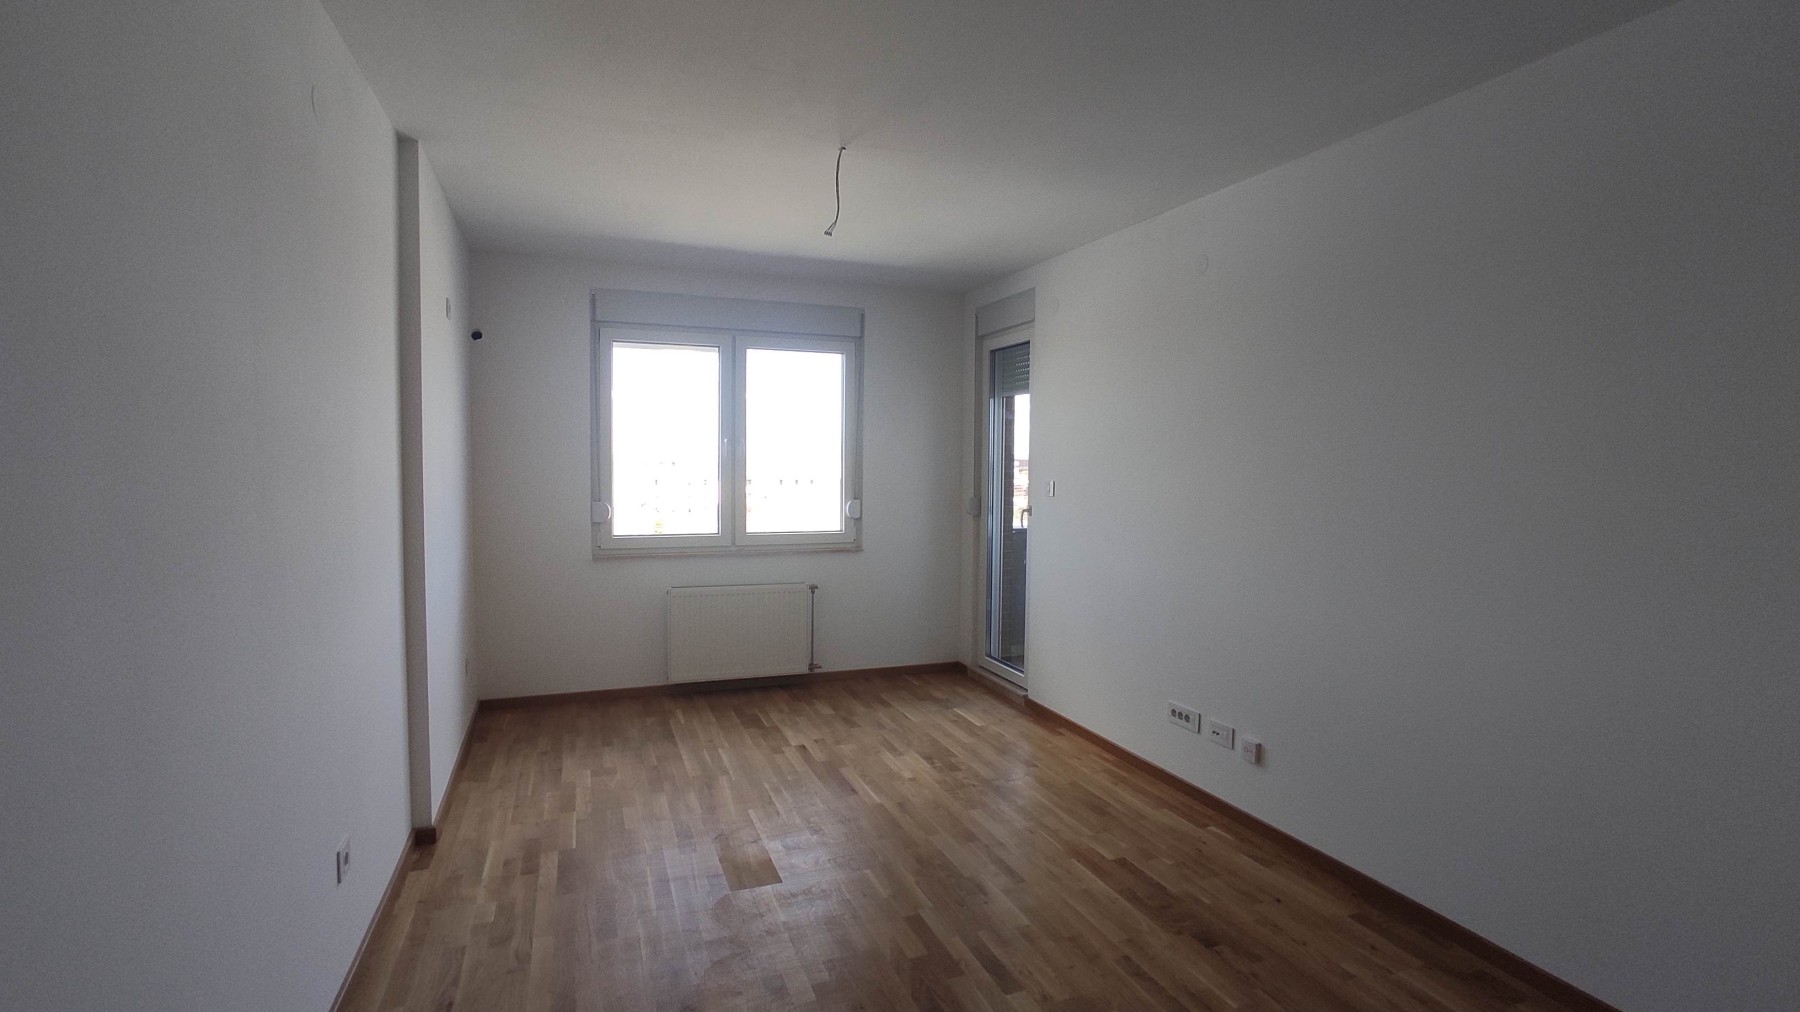 Apartment, Two-room apartment (one bedroom)<br>44 m<sup>2</sup>, Bulevar Evrope